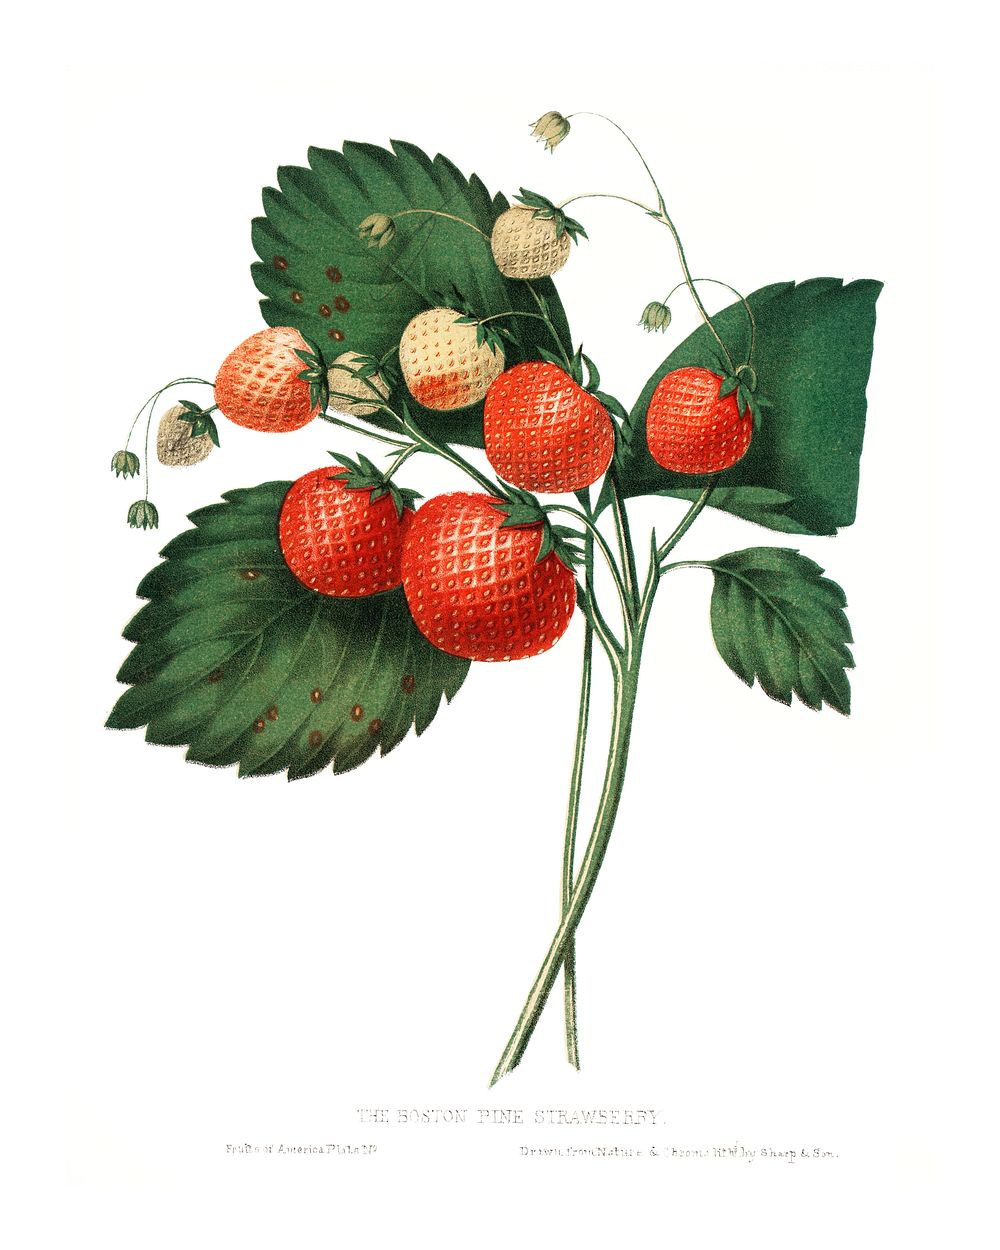 The Boston Pine Strawberry vintage illustration by Charles Hovey. 